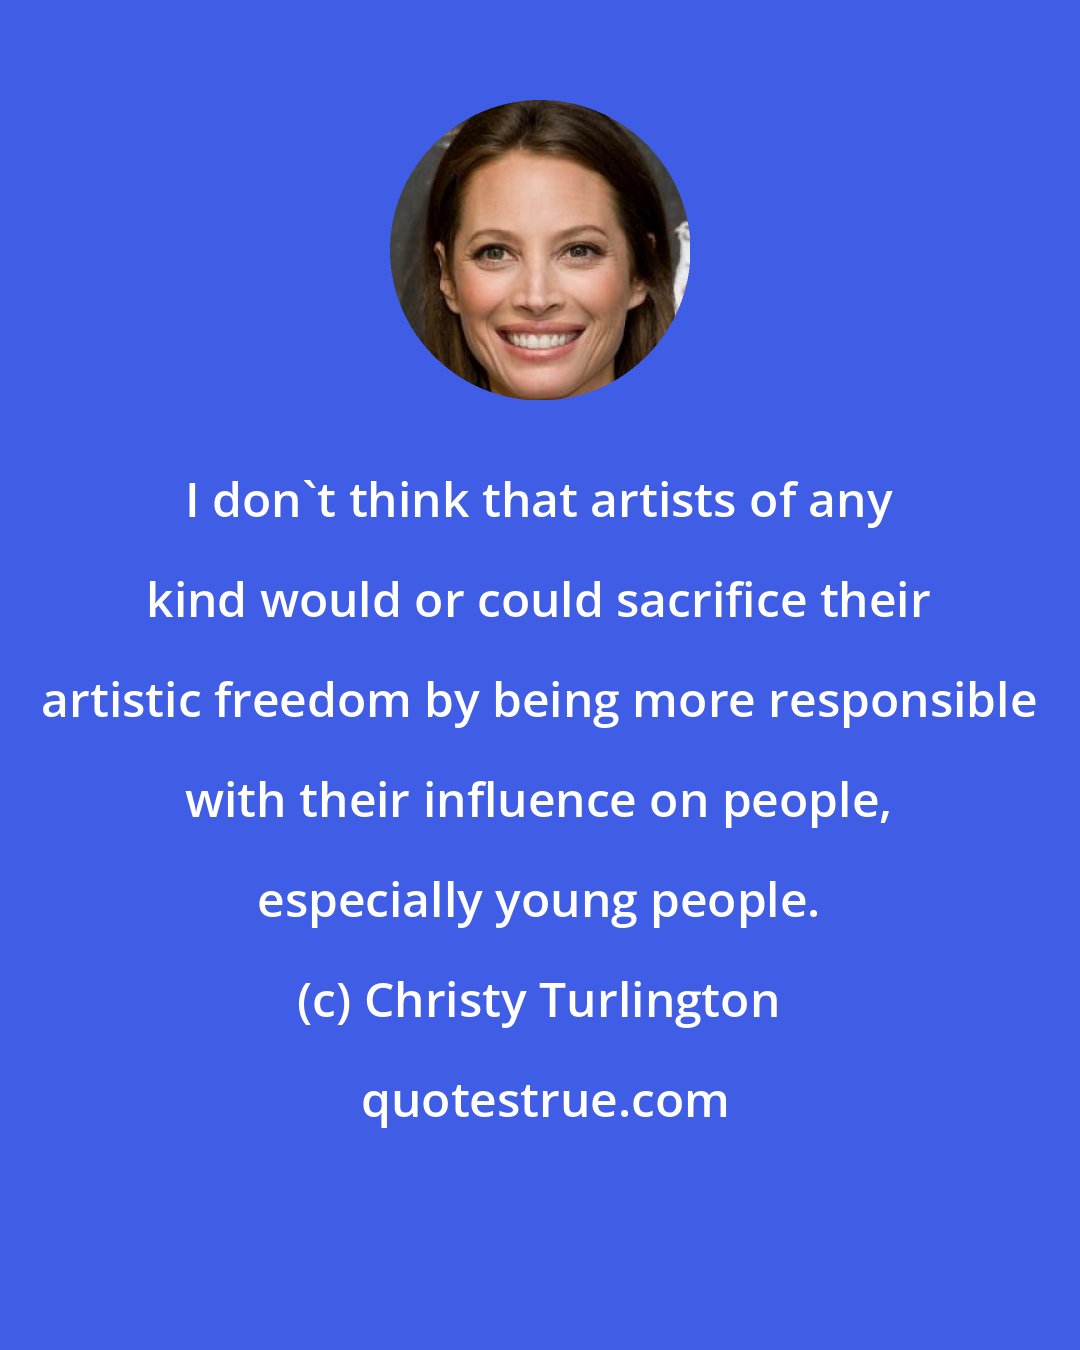 Christy Turlington: I don't think that artists of any kind would or could sacrifice their artistic freedom by being more responsible with their influence on people, especially young people.